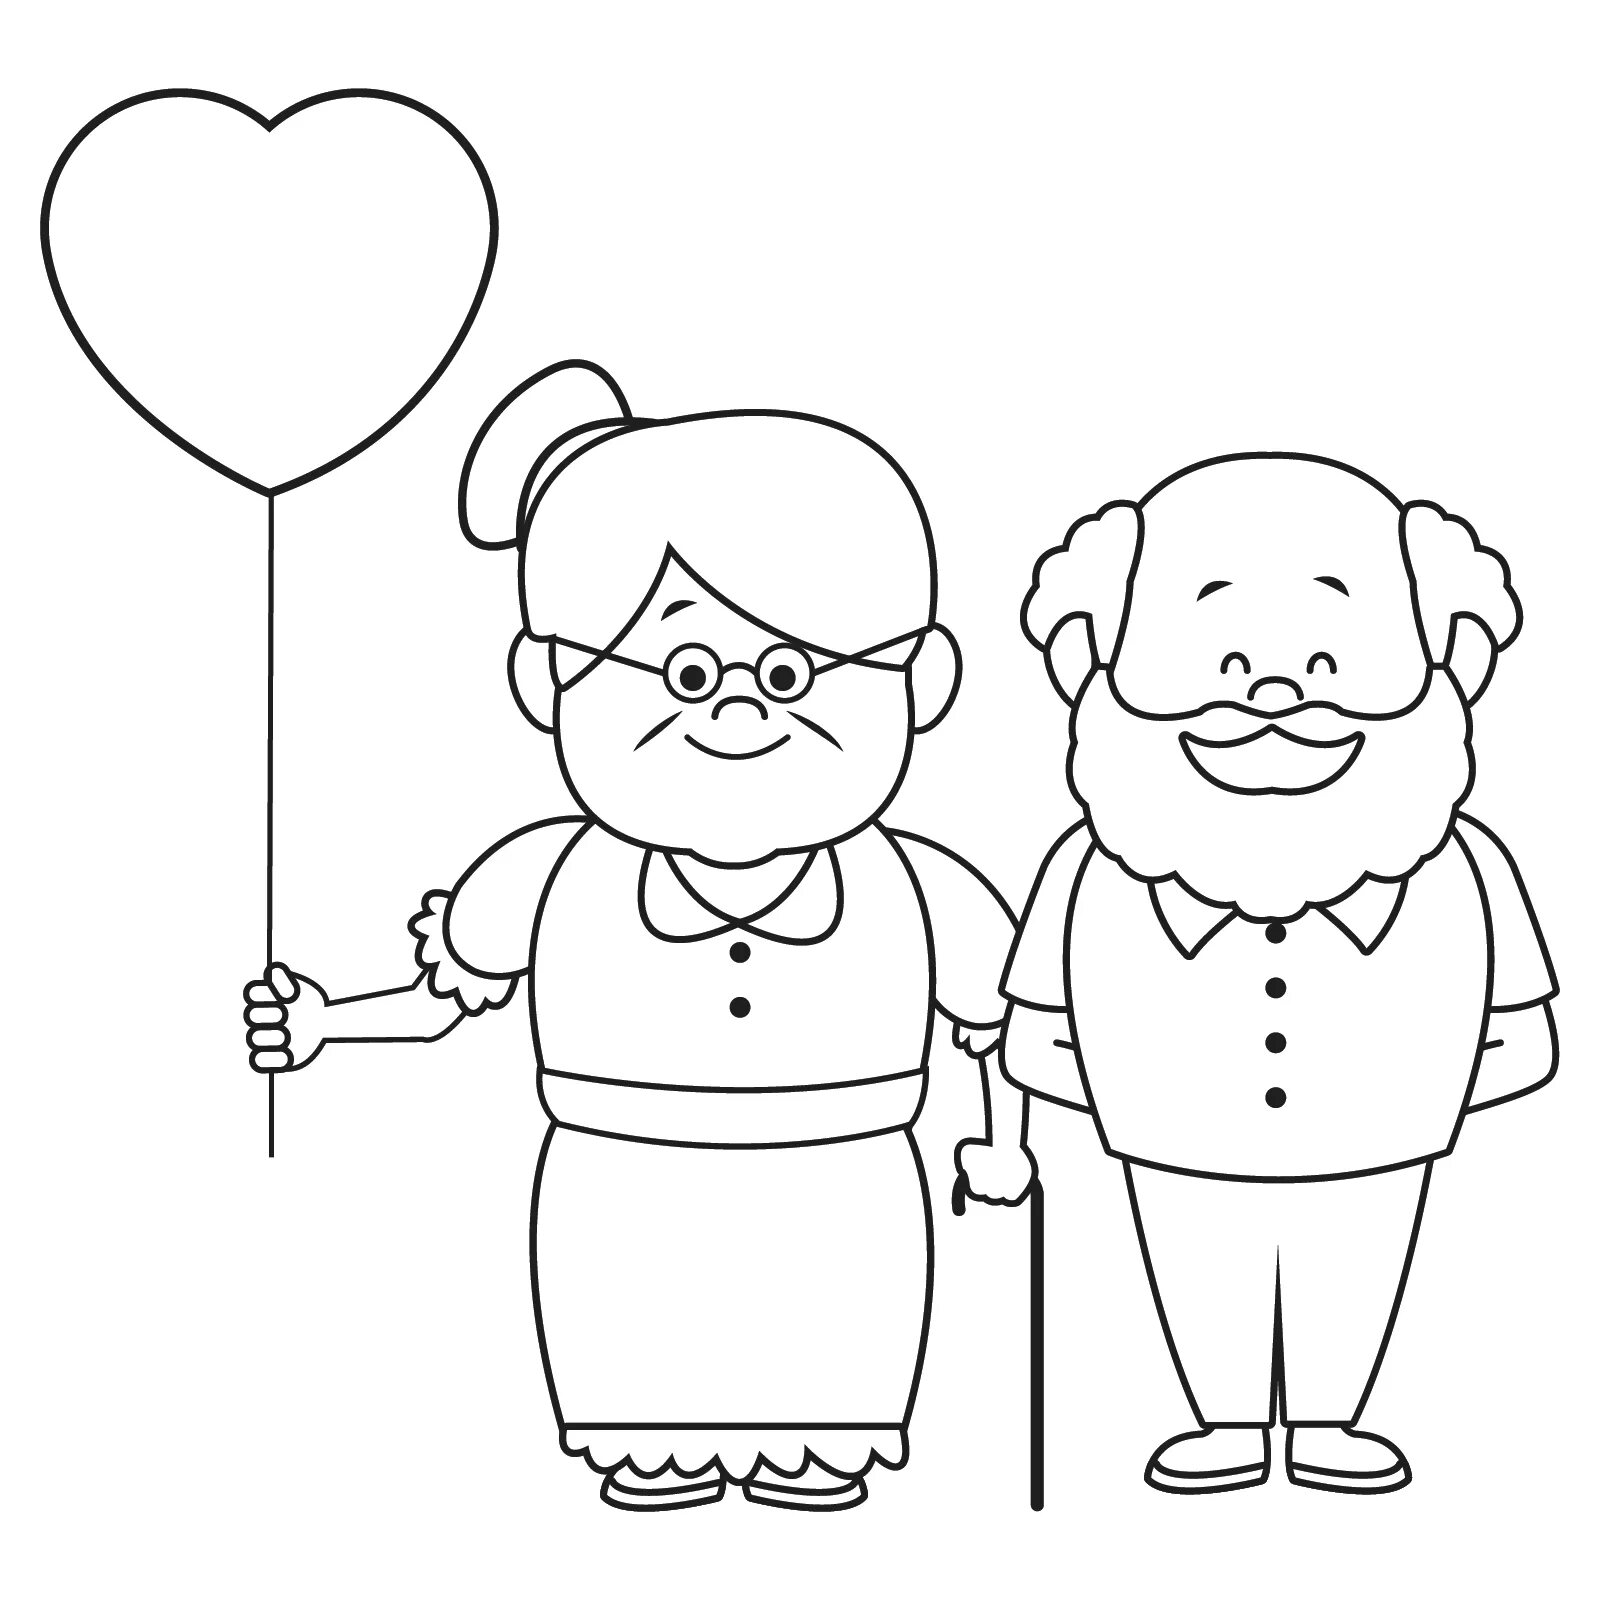 Wonderful grandparents coloring pages for kids